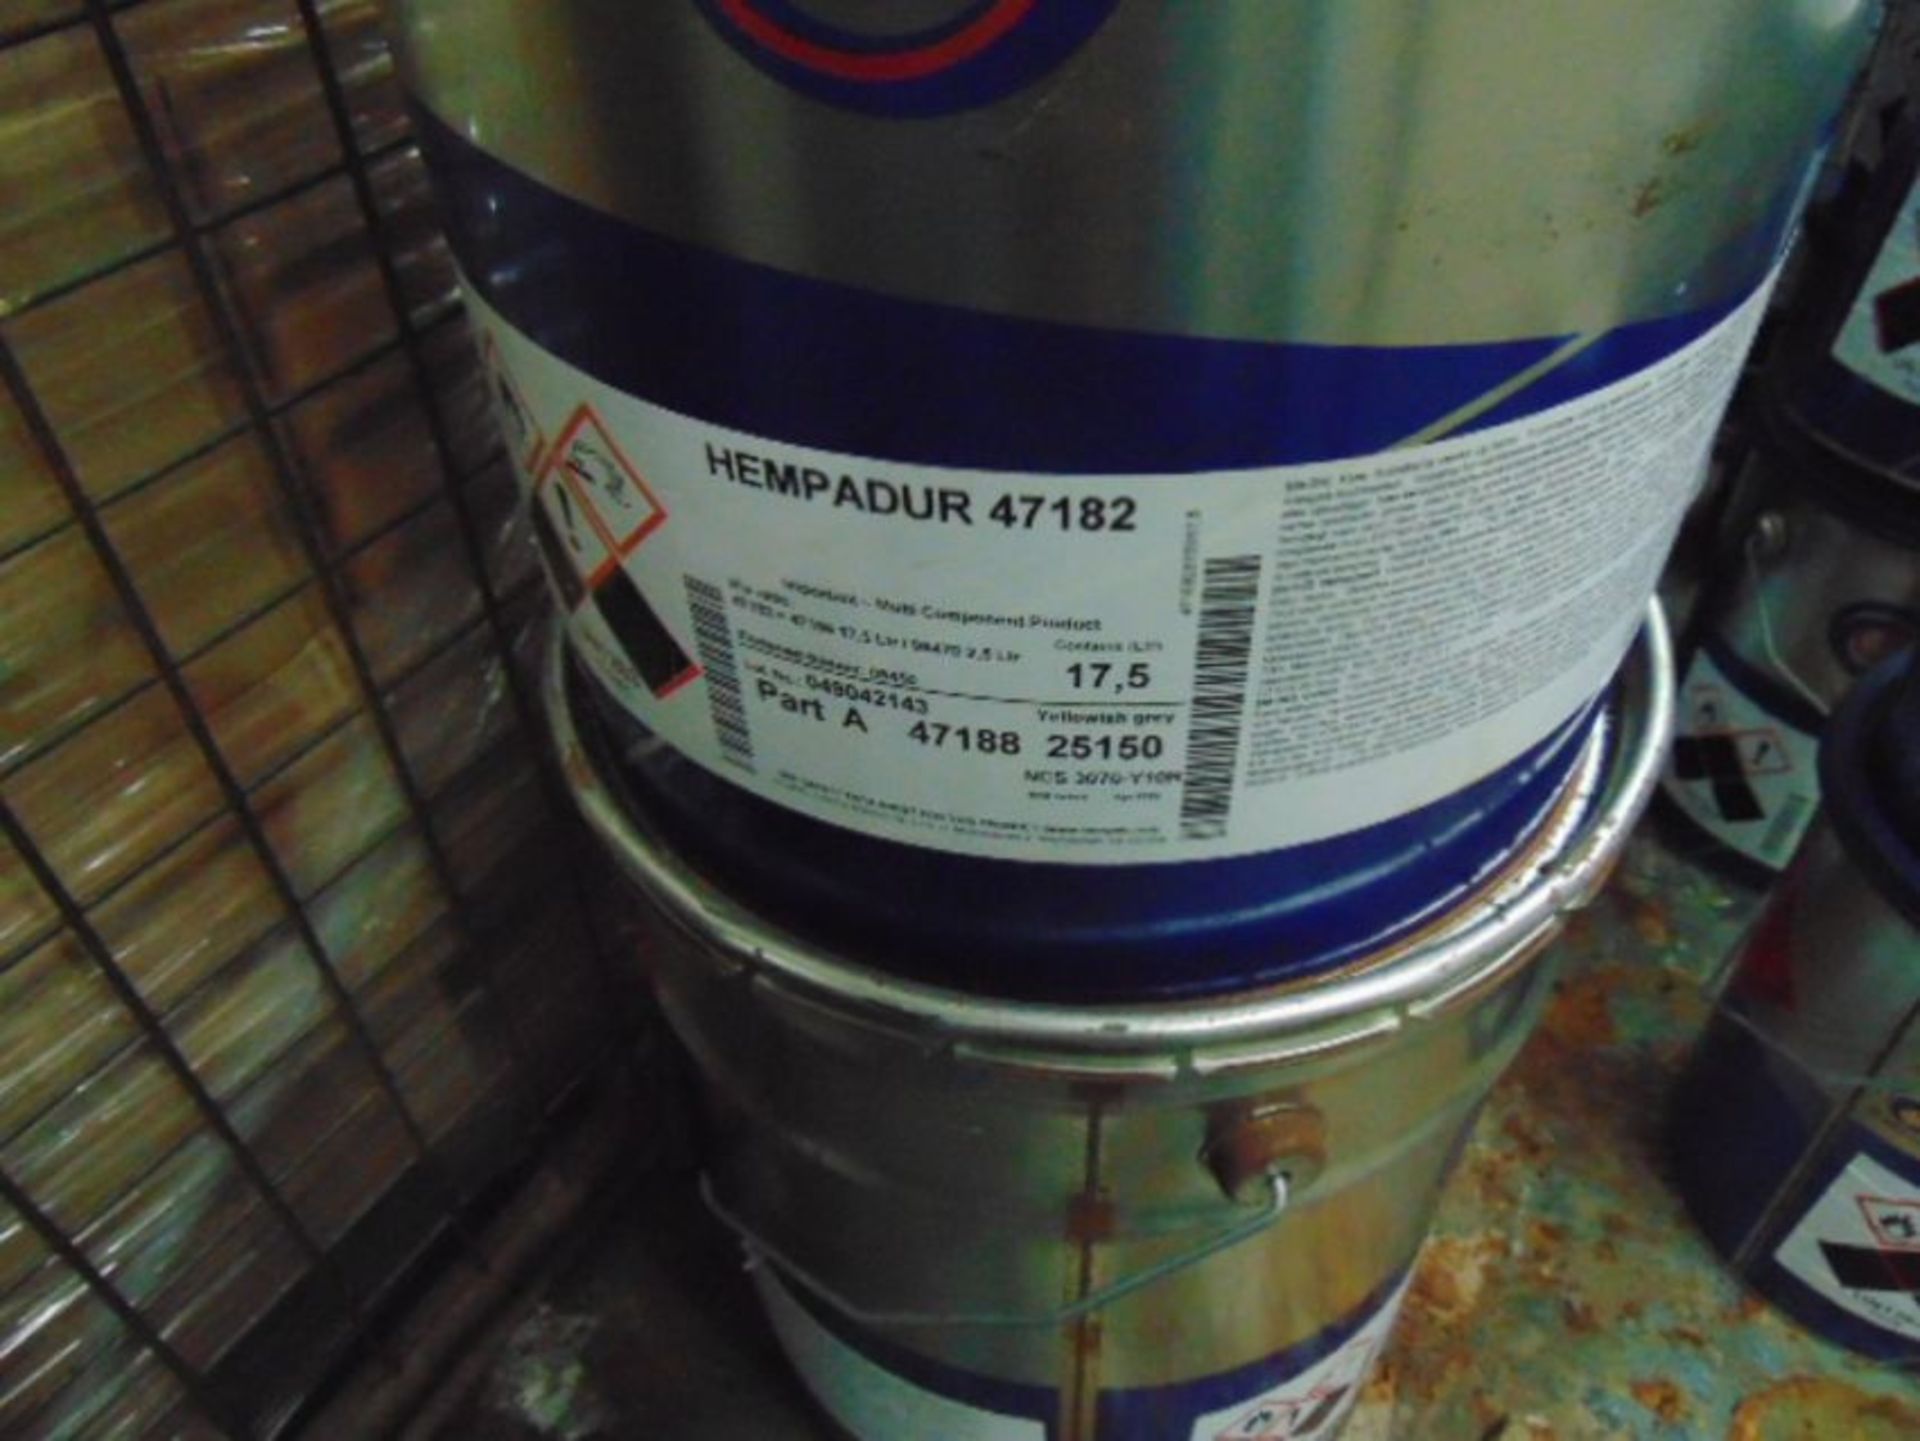 6x 17.5 litre Drums of Hempels 47182 Gray anti corrosive 2 pack Gray paint - Image 3 of 3